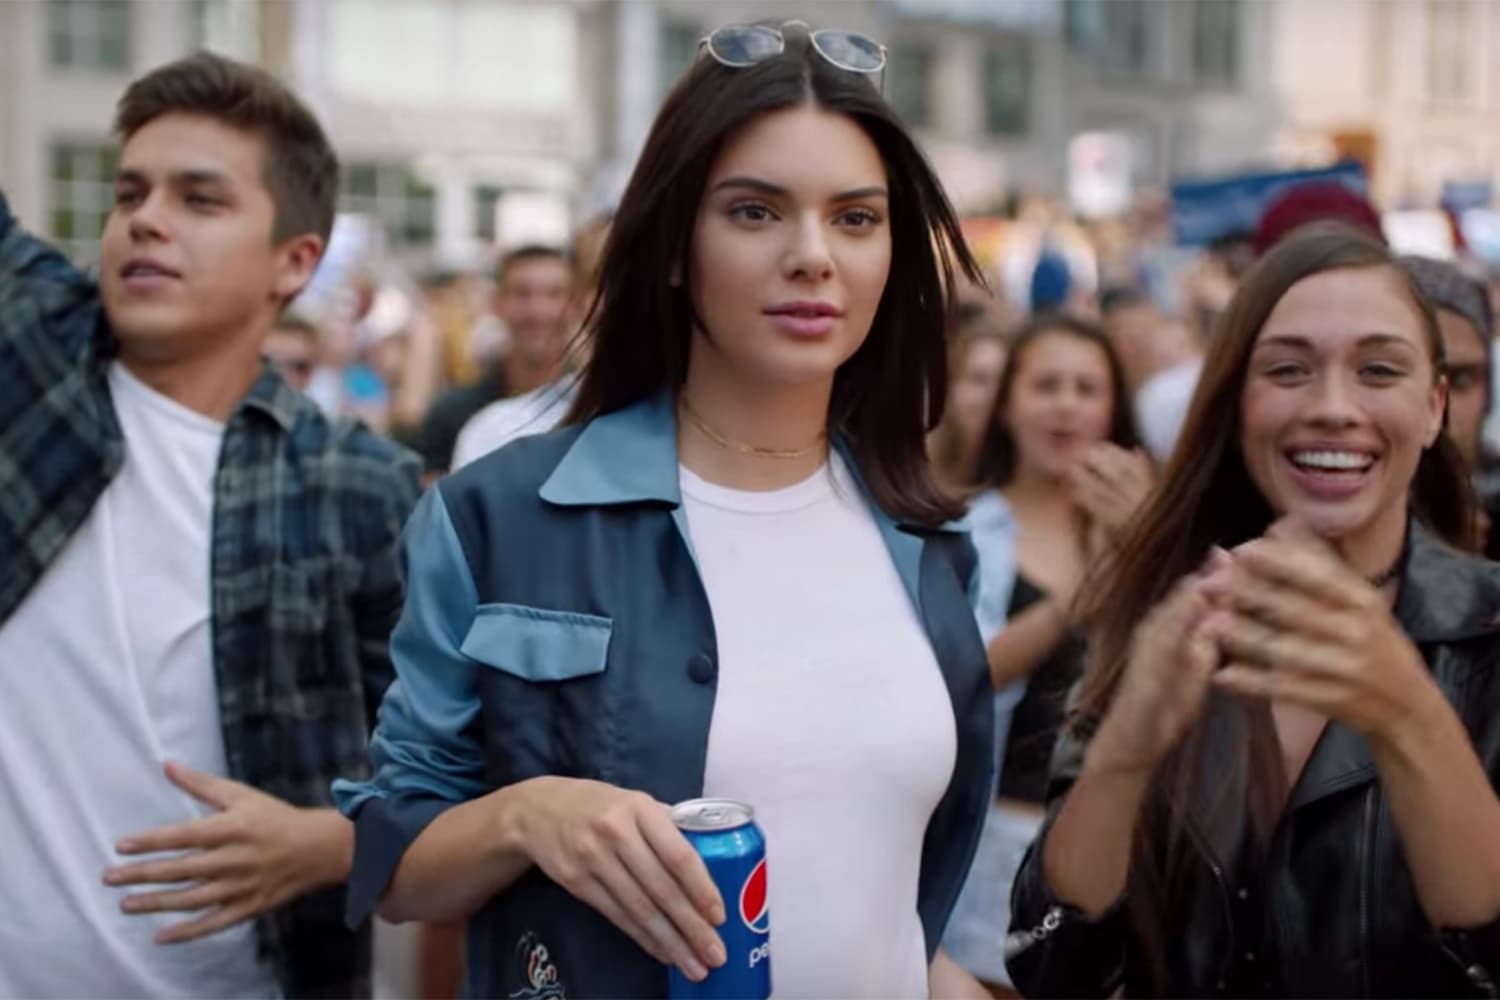 Kendall Jenner appears in a still from a controversial advertisement for Pepsi, which the company pulled after widespread criticism of the ad's content. (Pepsi) 